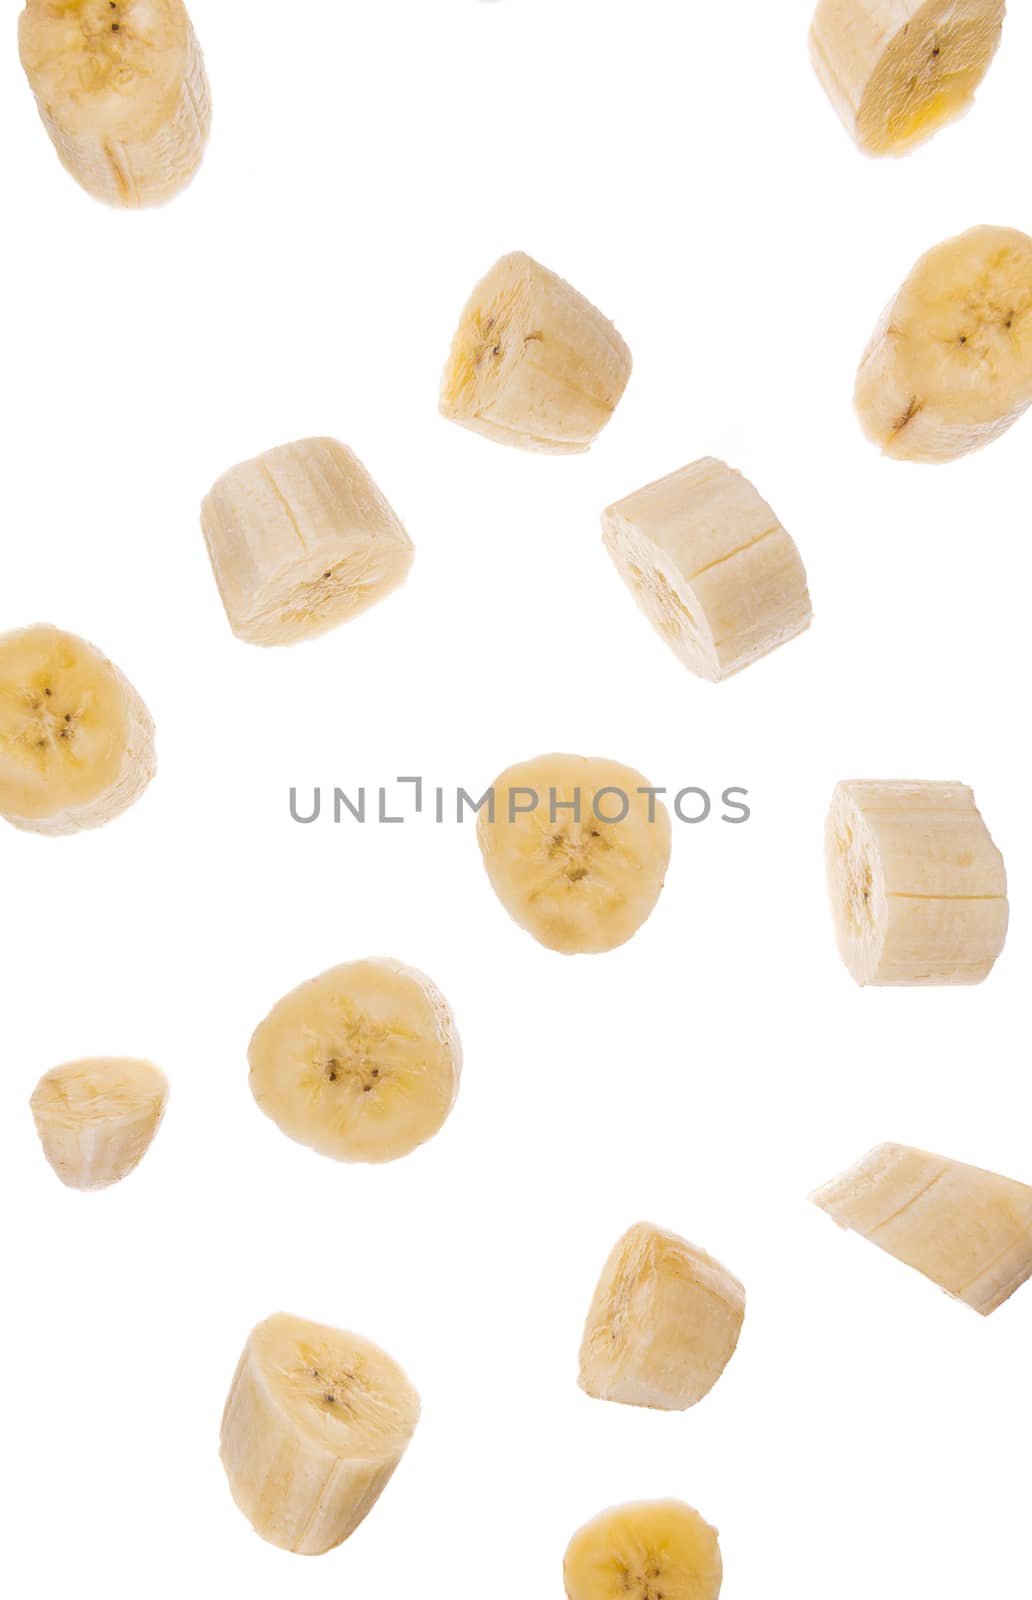 Banana slices isolated on a white background.